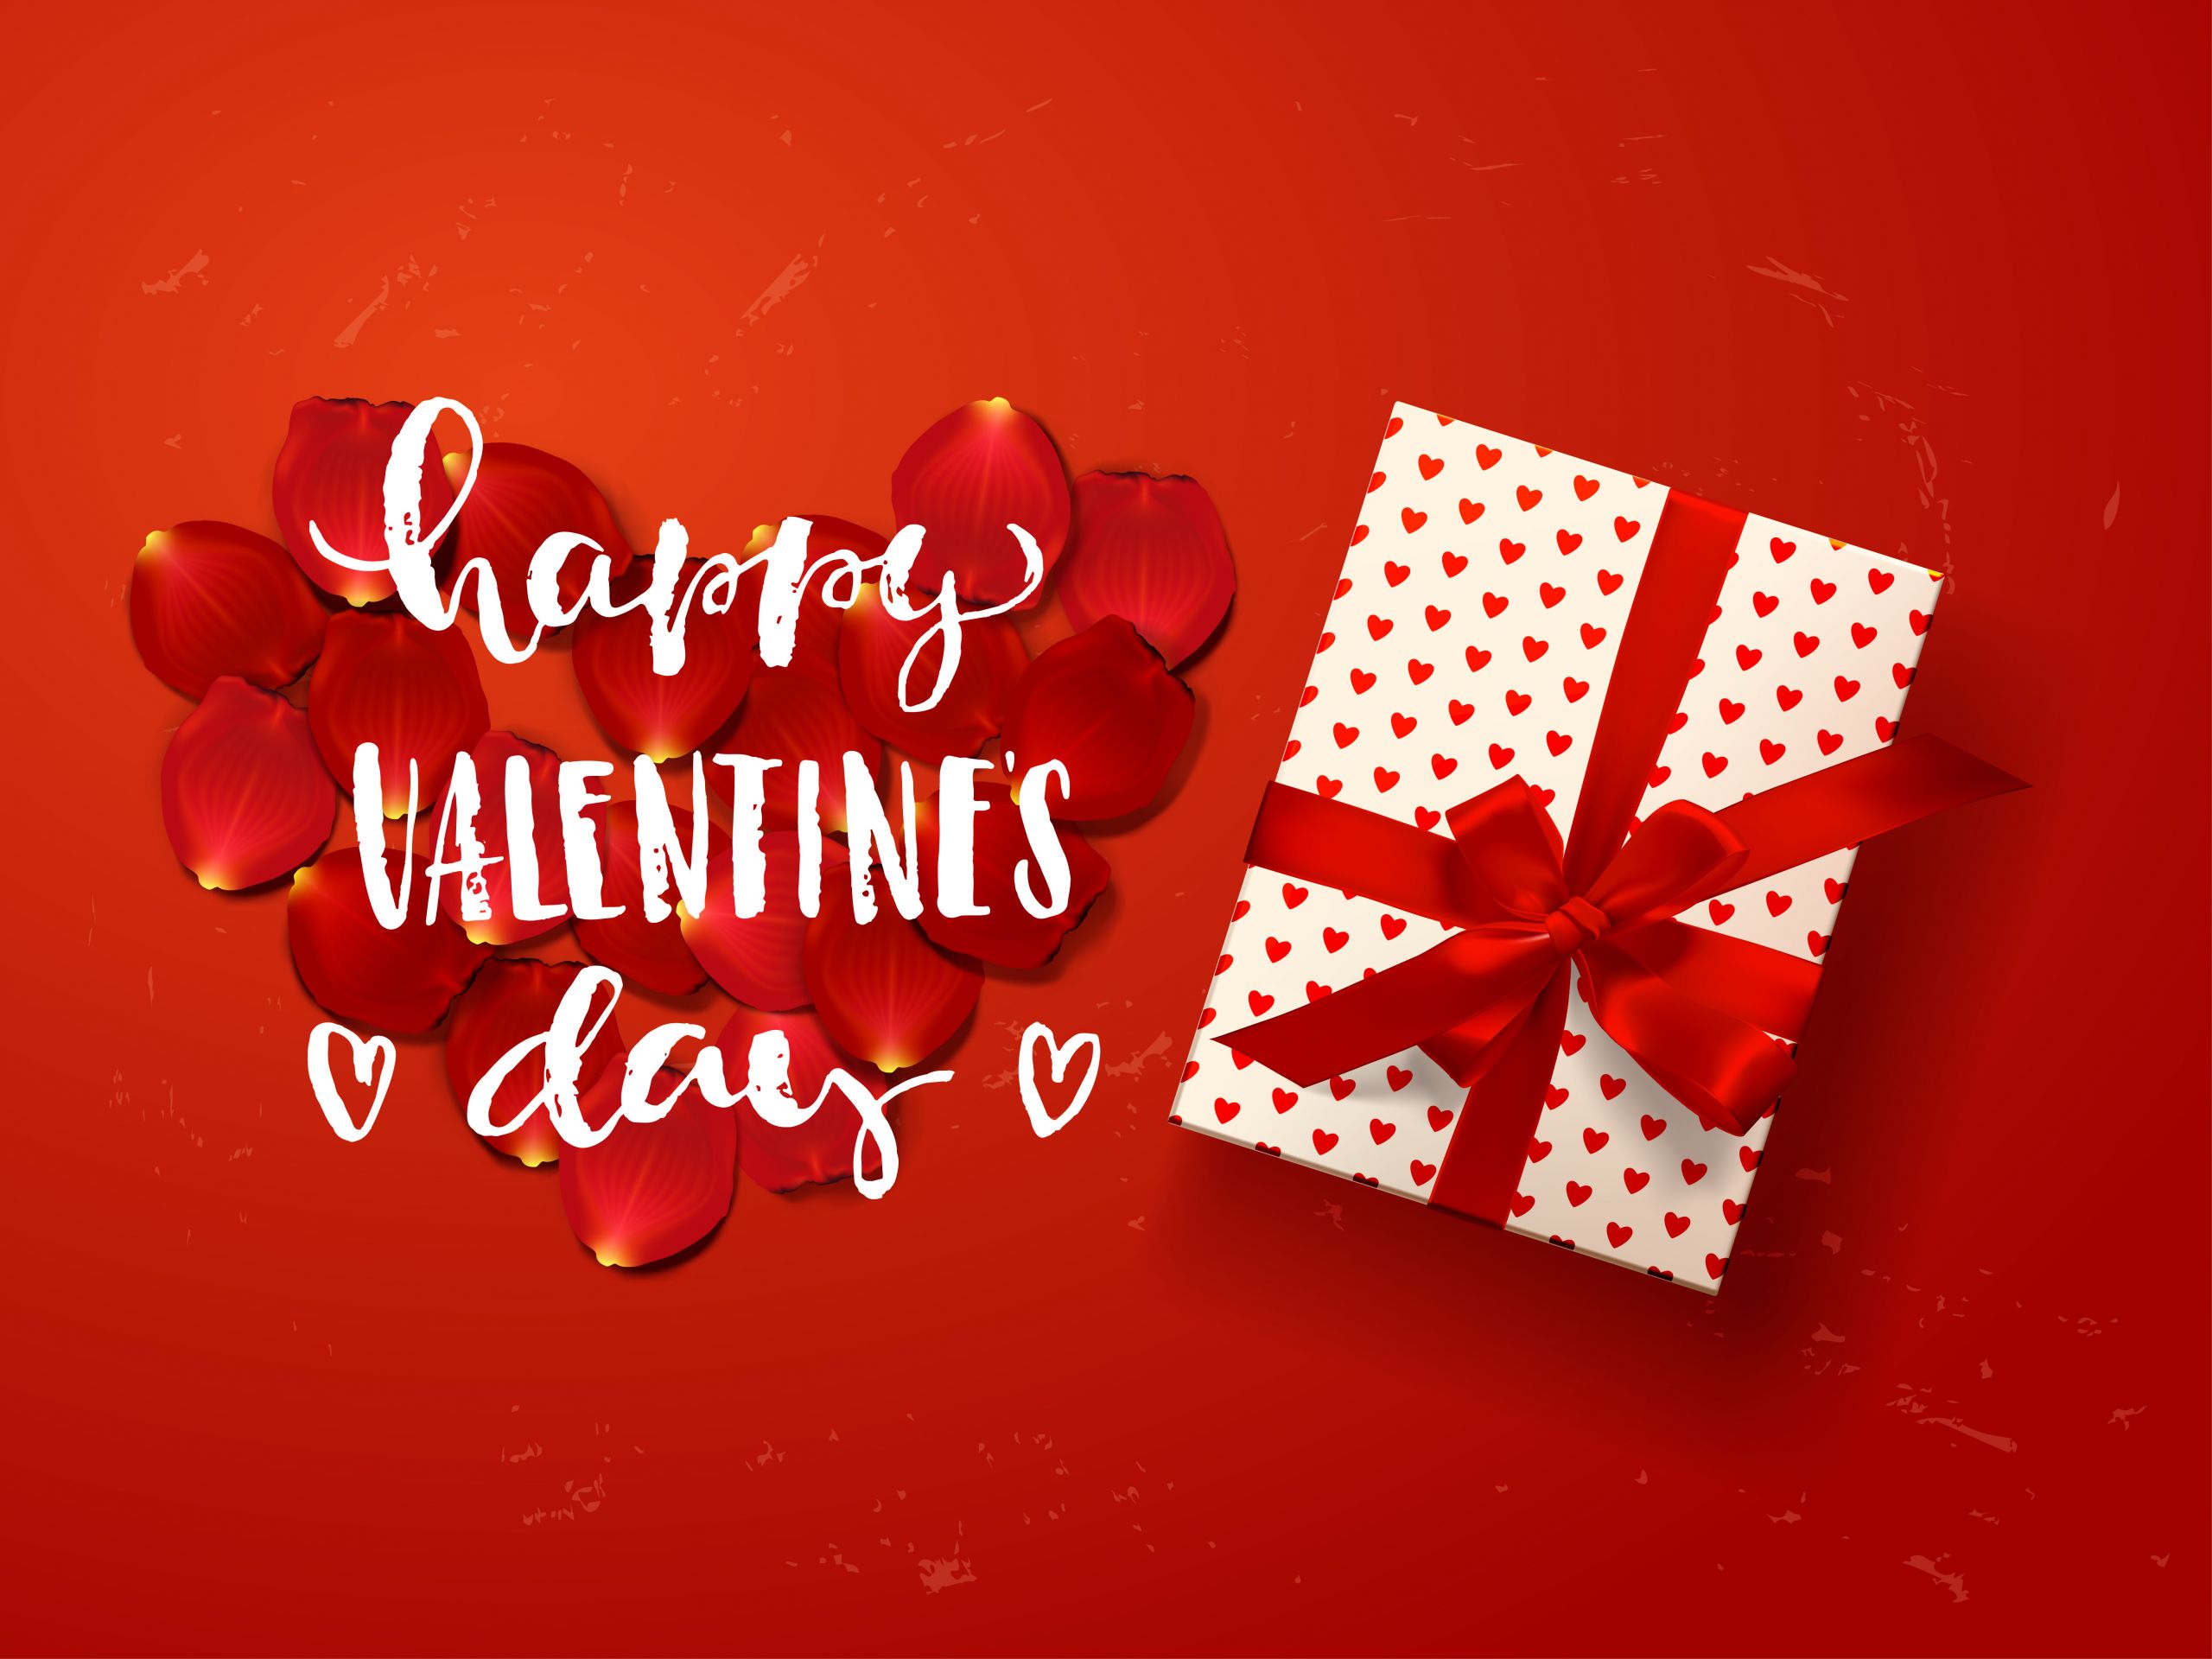 Ideas For Valentines Day 2019
 Valentine’s Day Gifts A Special Guide of Latest Gifts for